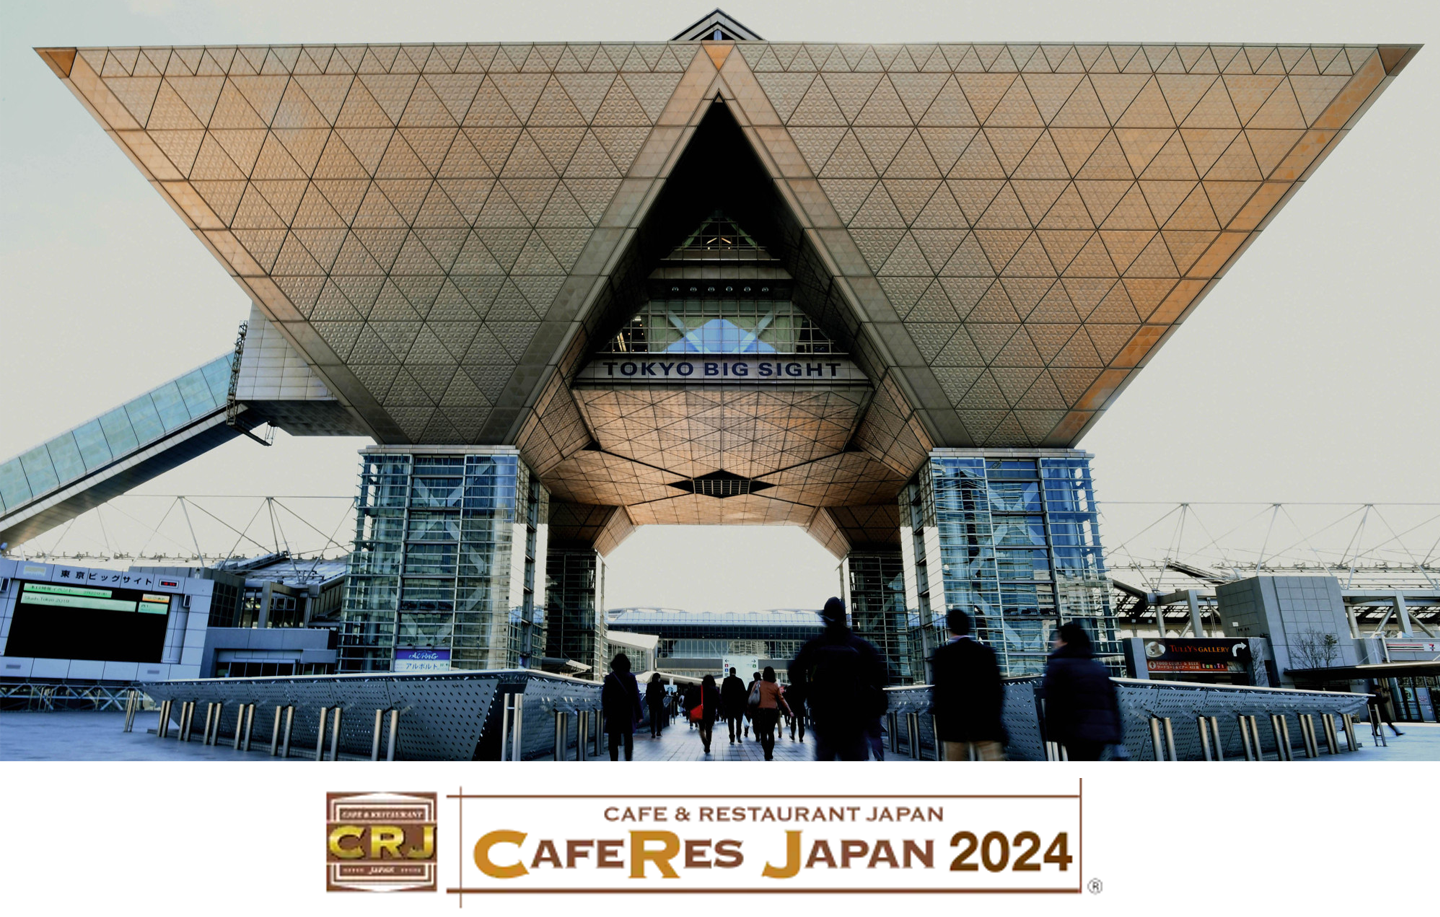 CafeRes Japan 2024: an unmissable event for coffee lovers